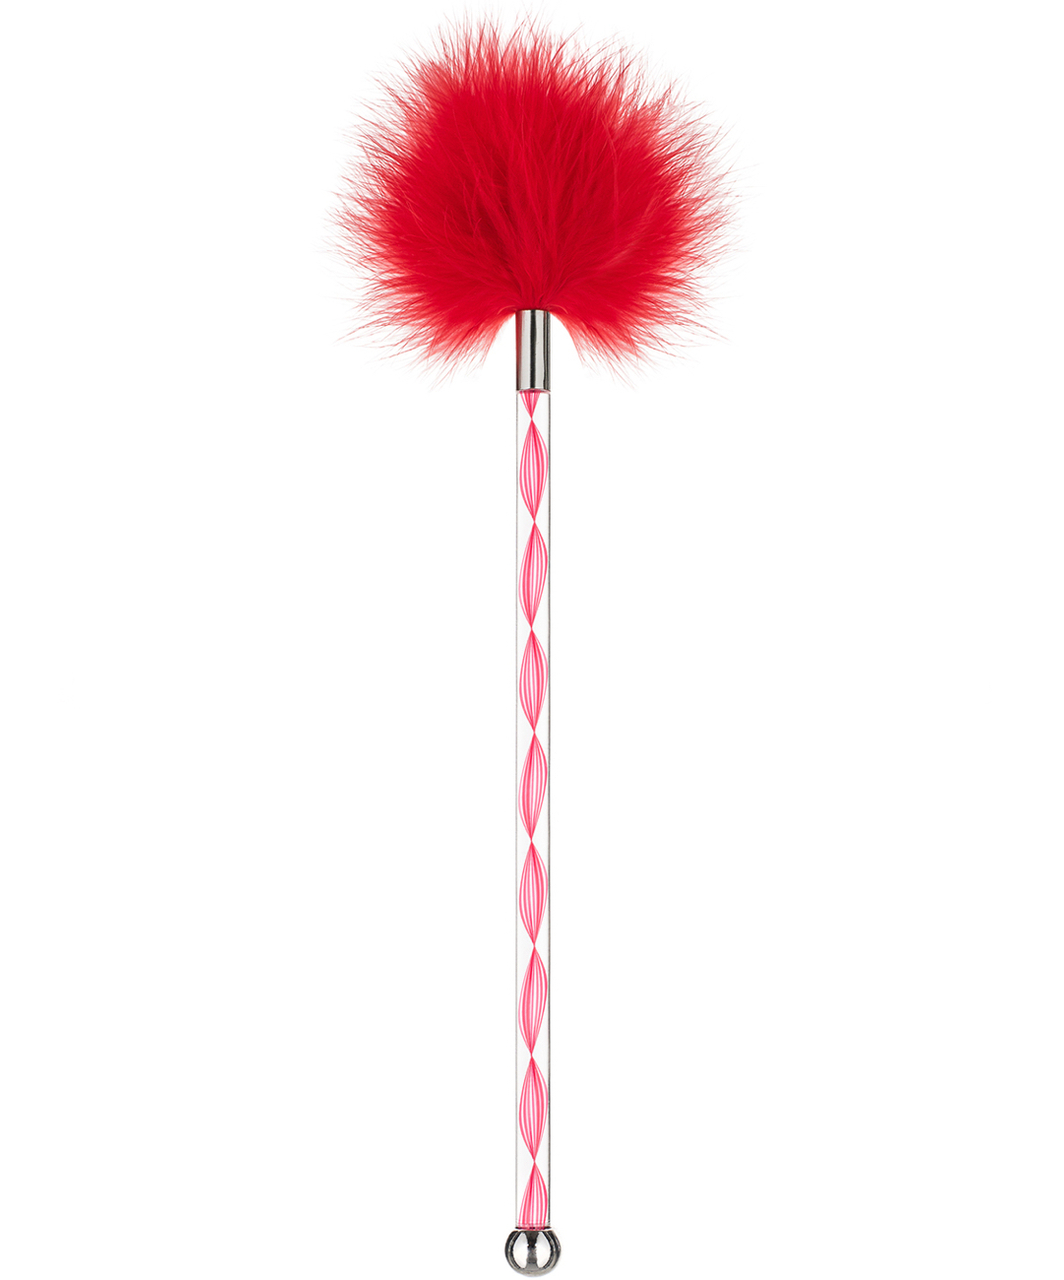 Obsessive Santasia red feather tickler